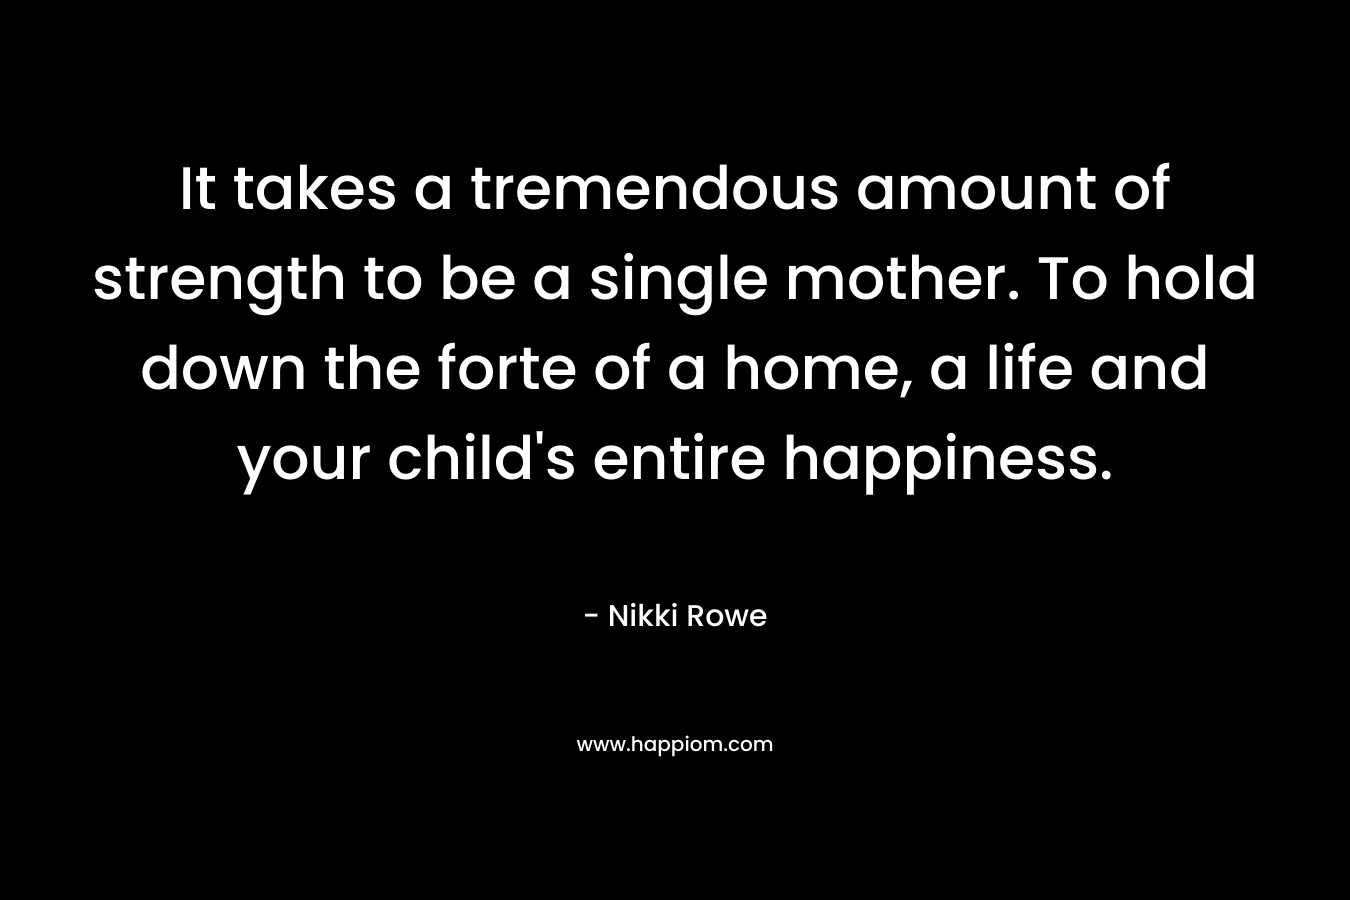 It takes a tremendous amount of strength to be a single mother. To hold down the forte of a home, a life and your child’s entire happiness. – Nikki Rowe